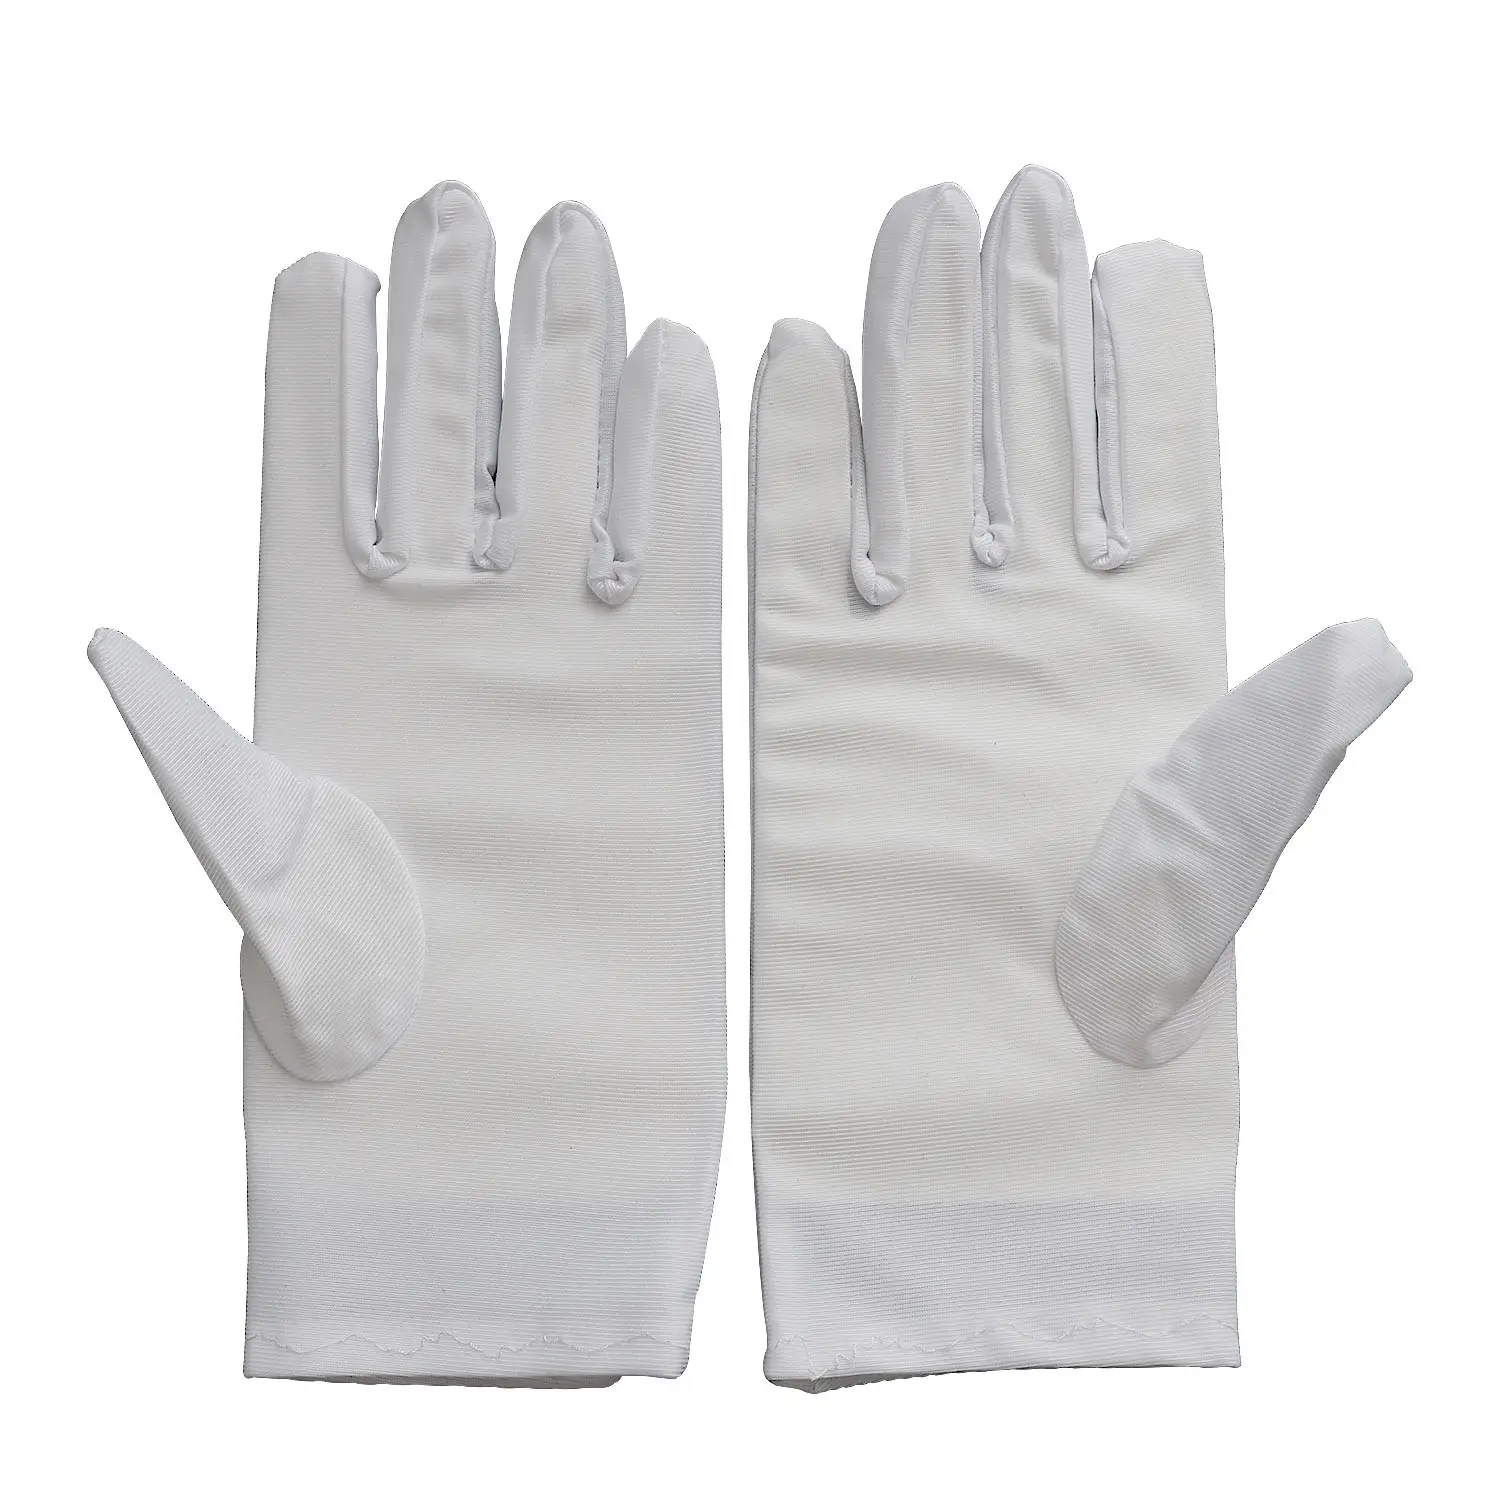 Jewelry Bead Gloves Etiquette Labor Protection Performance Stretch Sun Protection Gloves Work Industry Reception Gloves